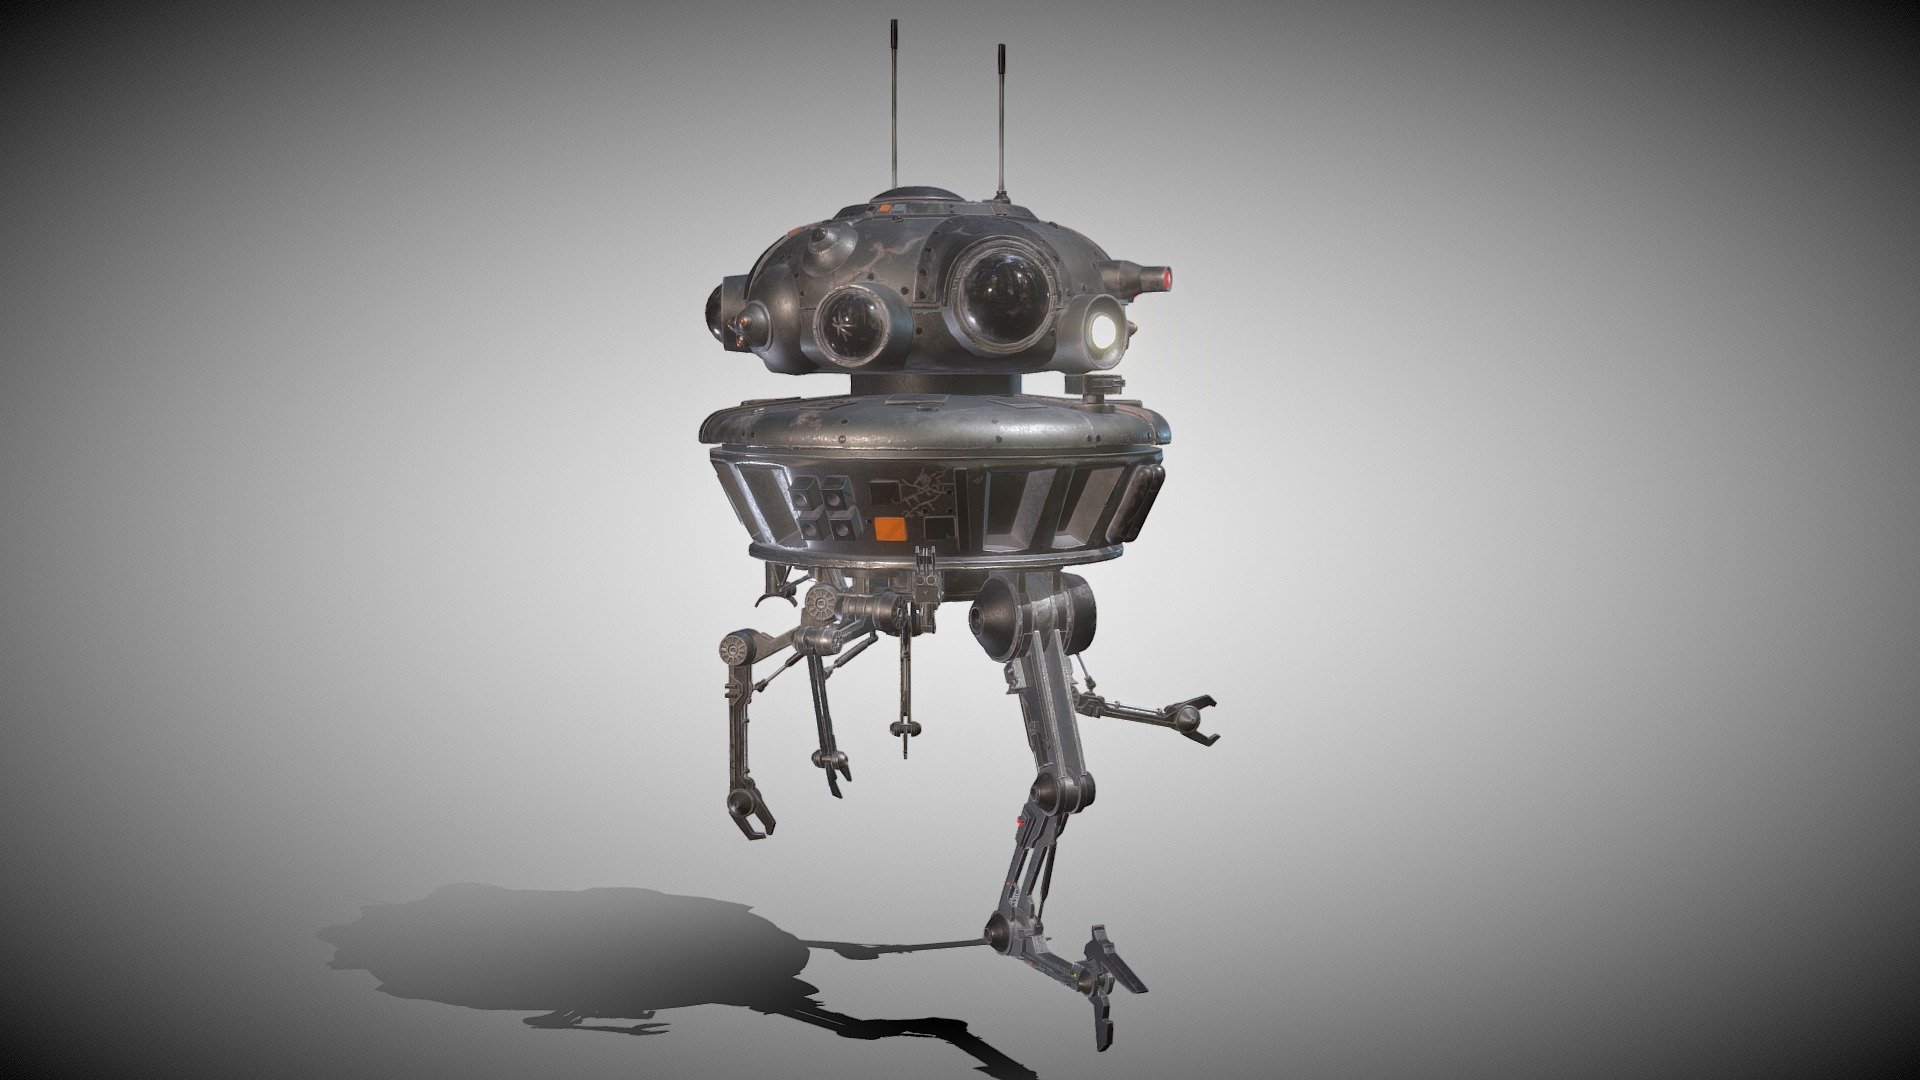 A fan art of a Viper probe droid first appear in Star Wars Empire Strikes Back I made some changes and modifications also added some damaged parts to have more personality made for a Challenge of Vertex School May 2020.

Update I am giving in Sale ready for a game engine I included the FBX. MA. Marmoset files and textures png AO, Diffuse, Normal, Roughness, Base color and Metallic it has 72622 tris, 37650 Polys, 78053 Edges, 40962 Verts each texture are 4096 x 4096 If you need 3D Game Assets or STL files I can do commission works 3d model